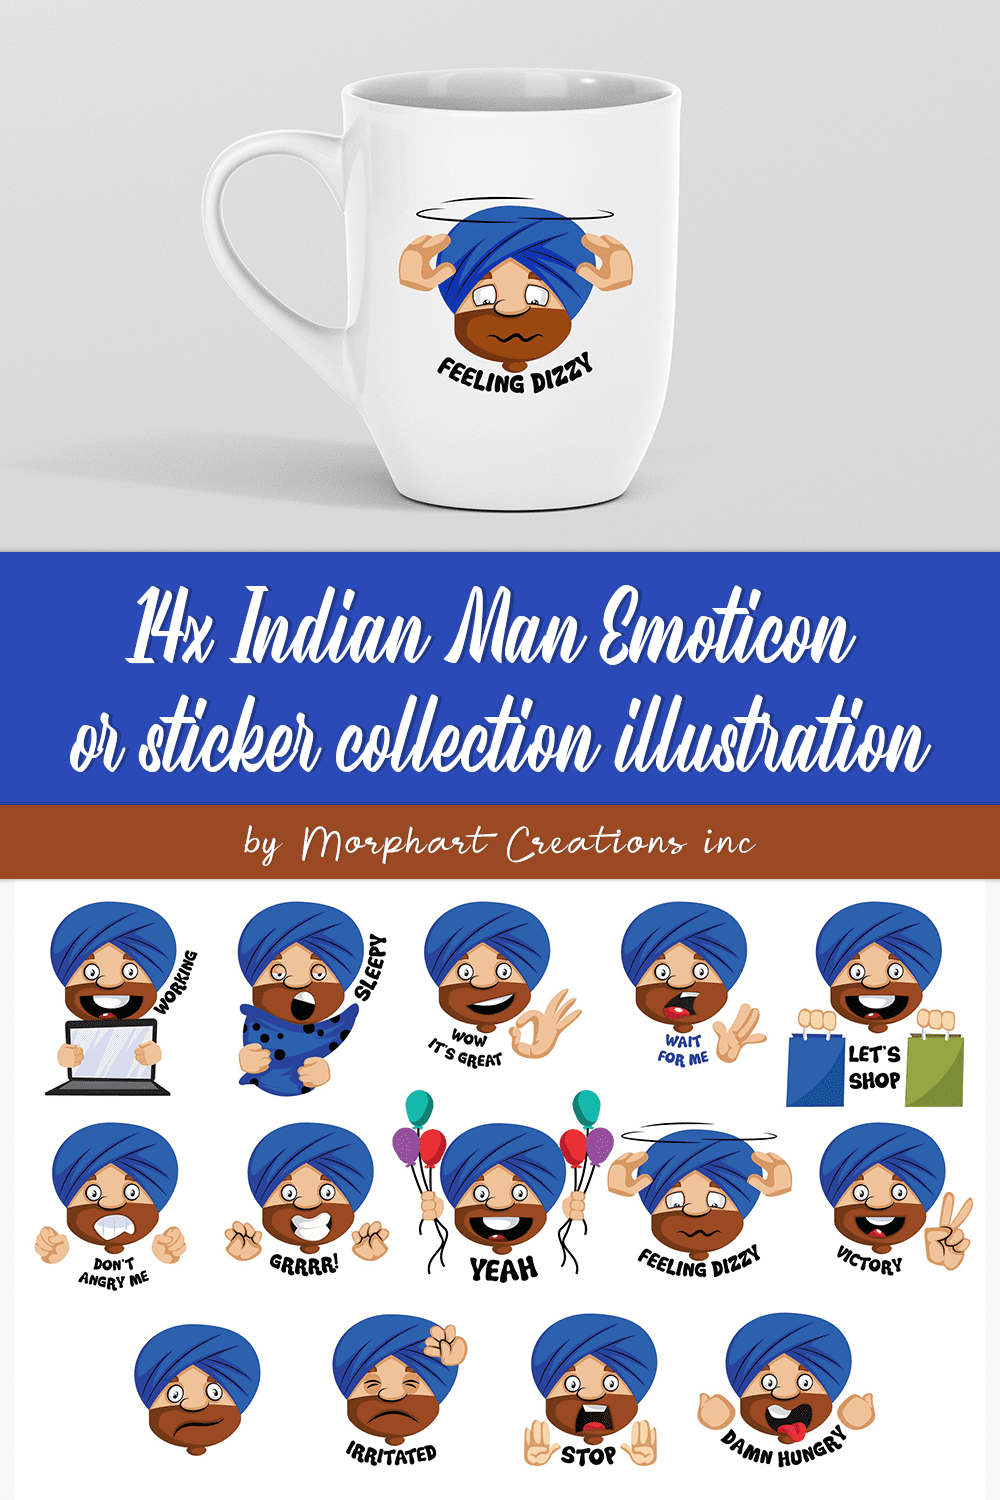 Cover with amazing images of Indian man emoticon.